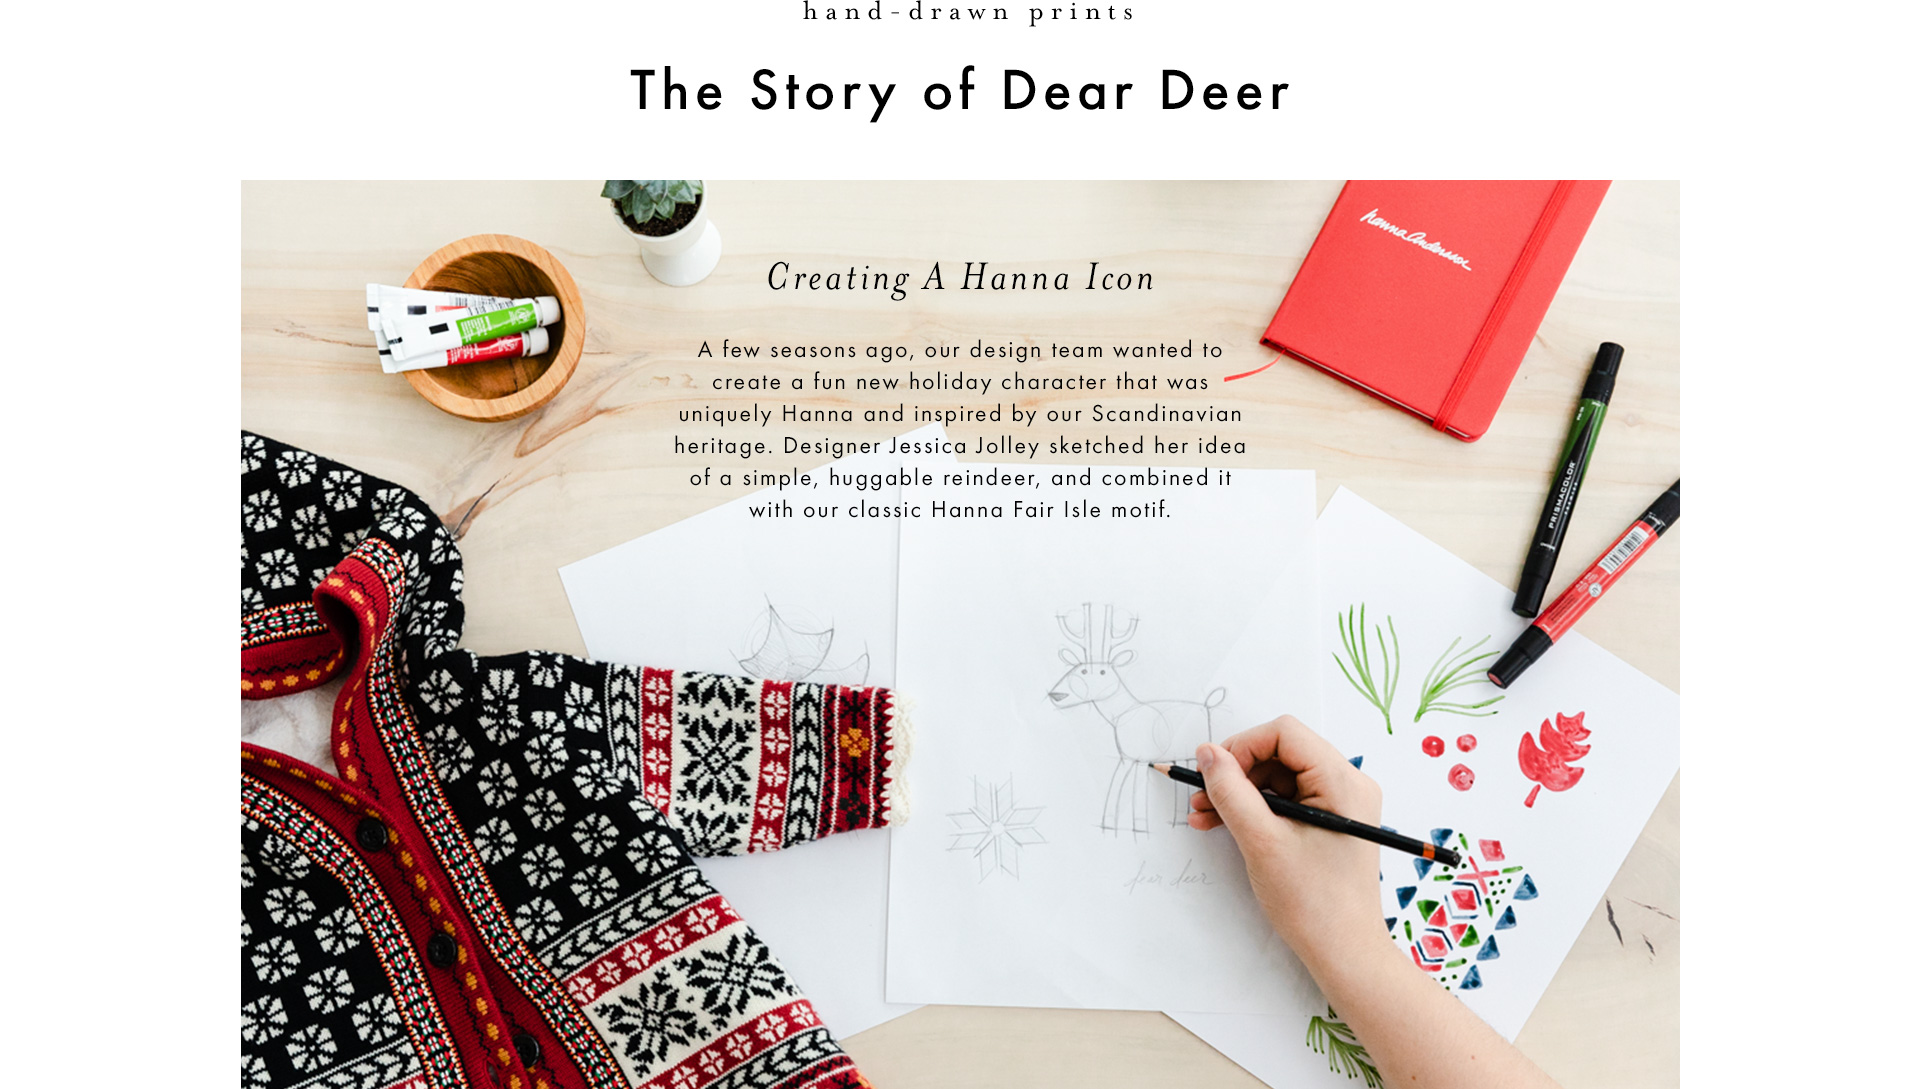 Inspiration for how our creators made our classic dear deer print